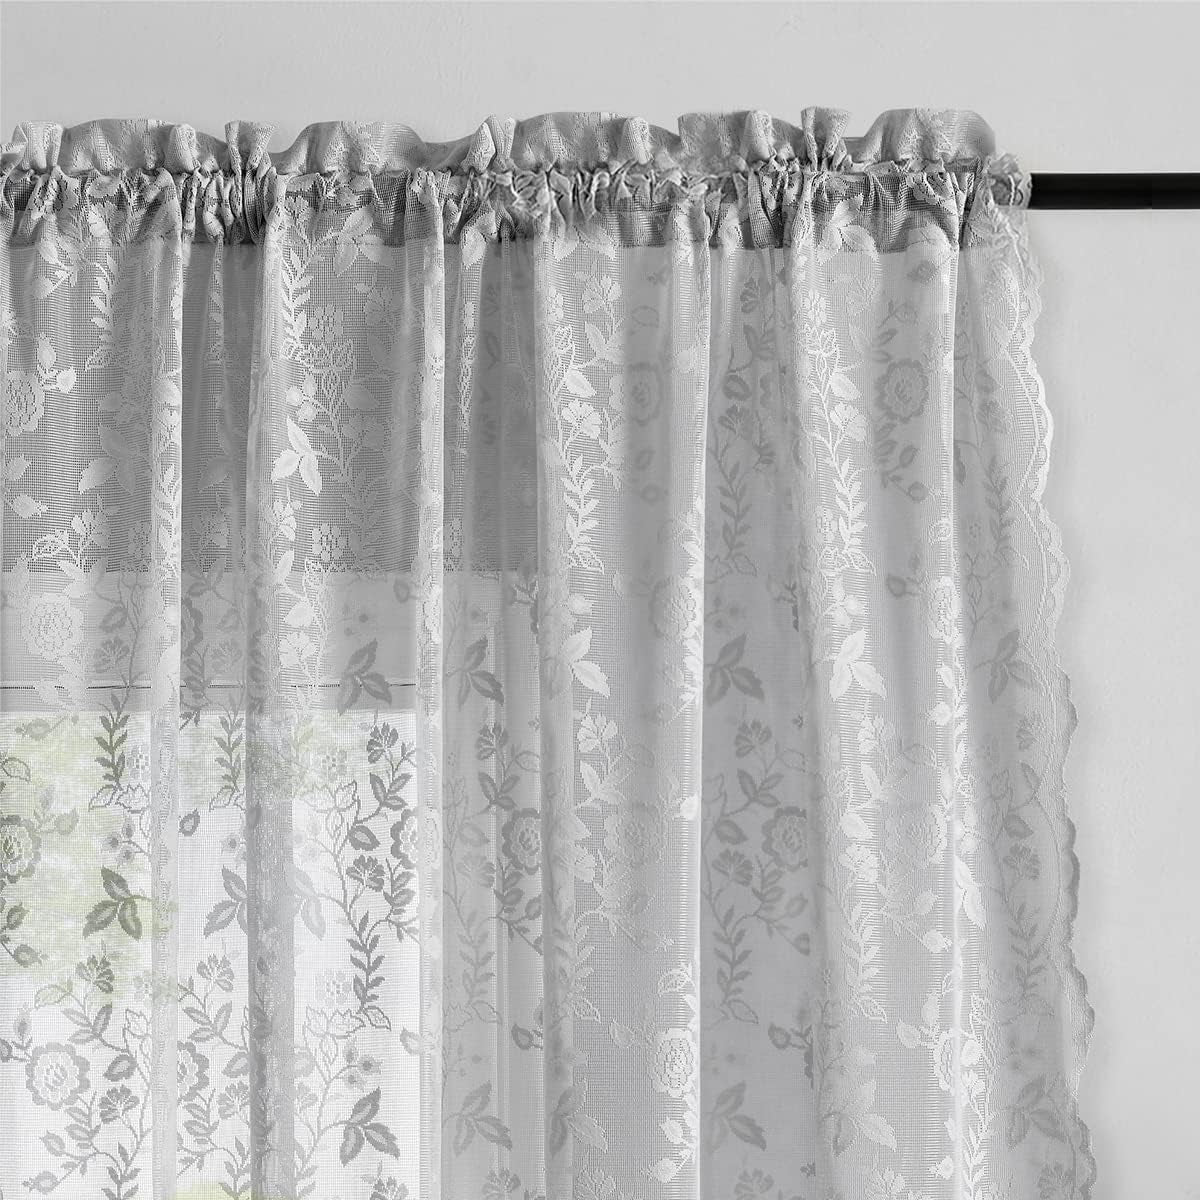 FINECITY Lace Curtains Country Rustic Floral Sheer Curtains for Living Room 72 Inch Length Drapes Vintage Floral Pattern Farmhouse Privacy Light Filtering Sheer Curtain 2 Panels, 52 X 72 Inch, Grey  Keyu Textile   